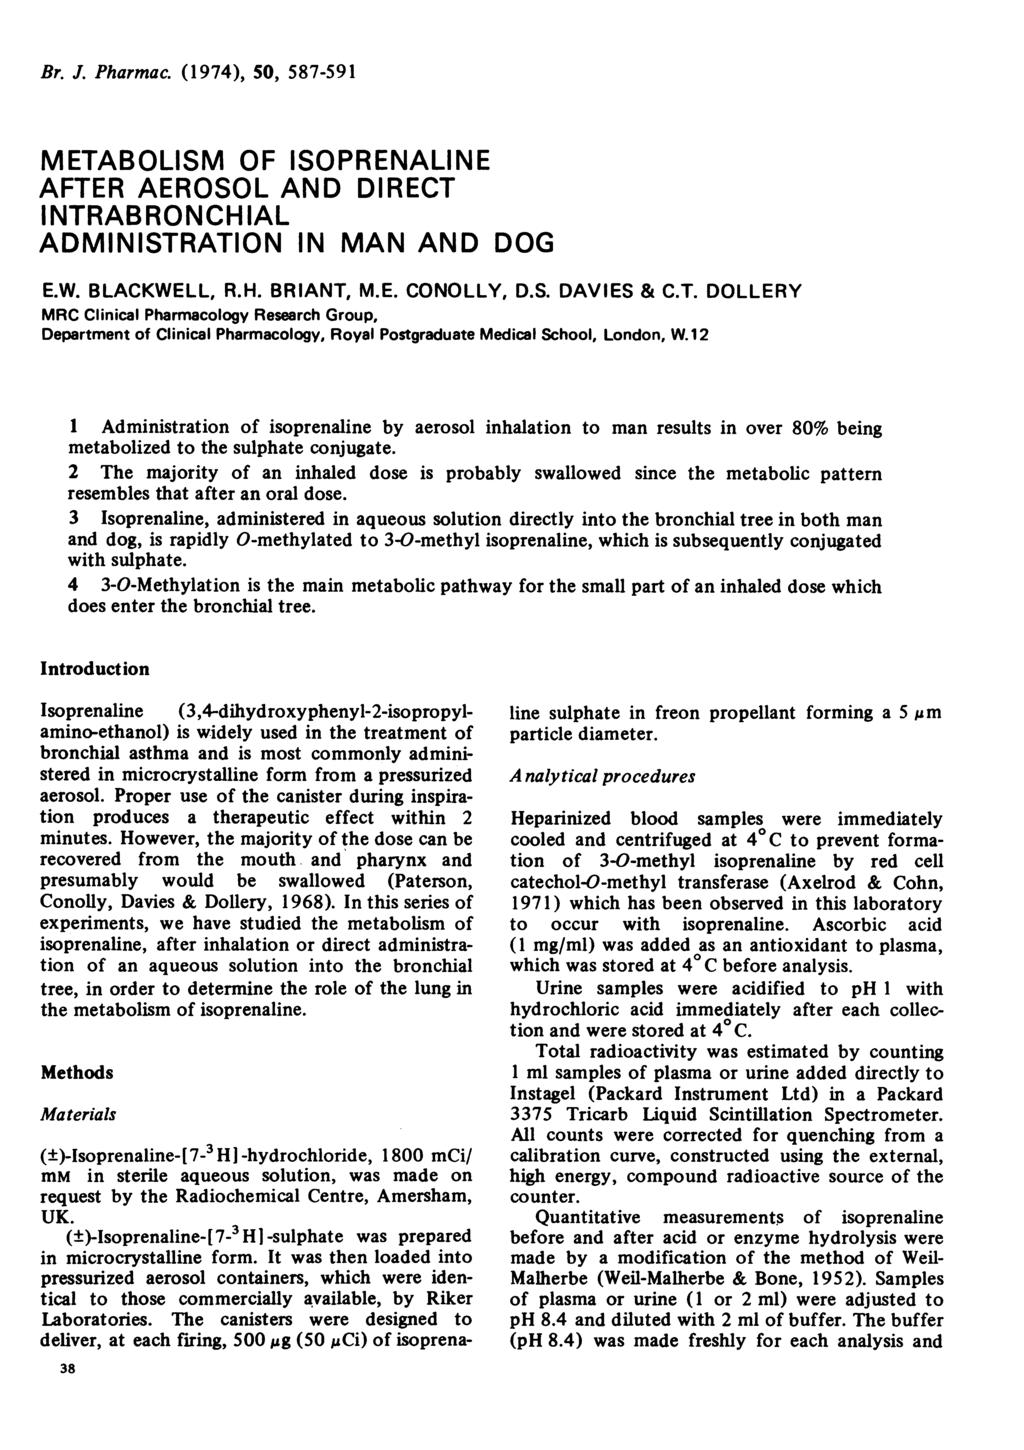 Br. J. Pharmac. (1974), 50, 587-591 METABOLISM OF ISOPRENALINE AFTER AEROSOL AND DIRECT INTRABRONCHIAL ADMINISTRATION IN MAN AND DOG E.W. BLACKWELL, R.H. BRIANT, M.E. CONOLLY, D.S. DAVIES & C.T. DOLLERY MRC Clinical Pharmacology Research Group, Department of Clinical Pharmacology, Royal Postgraduate Medical School, London, W.